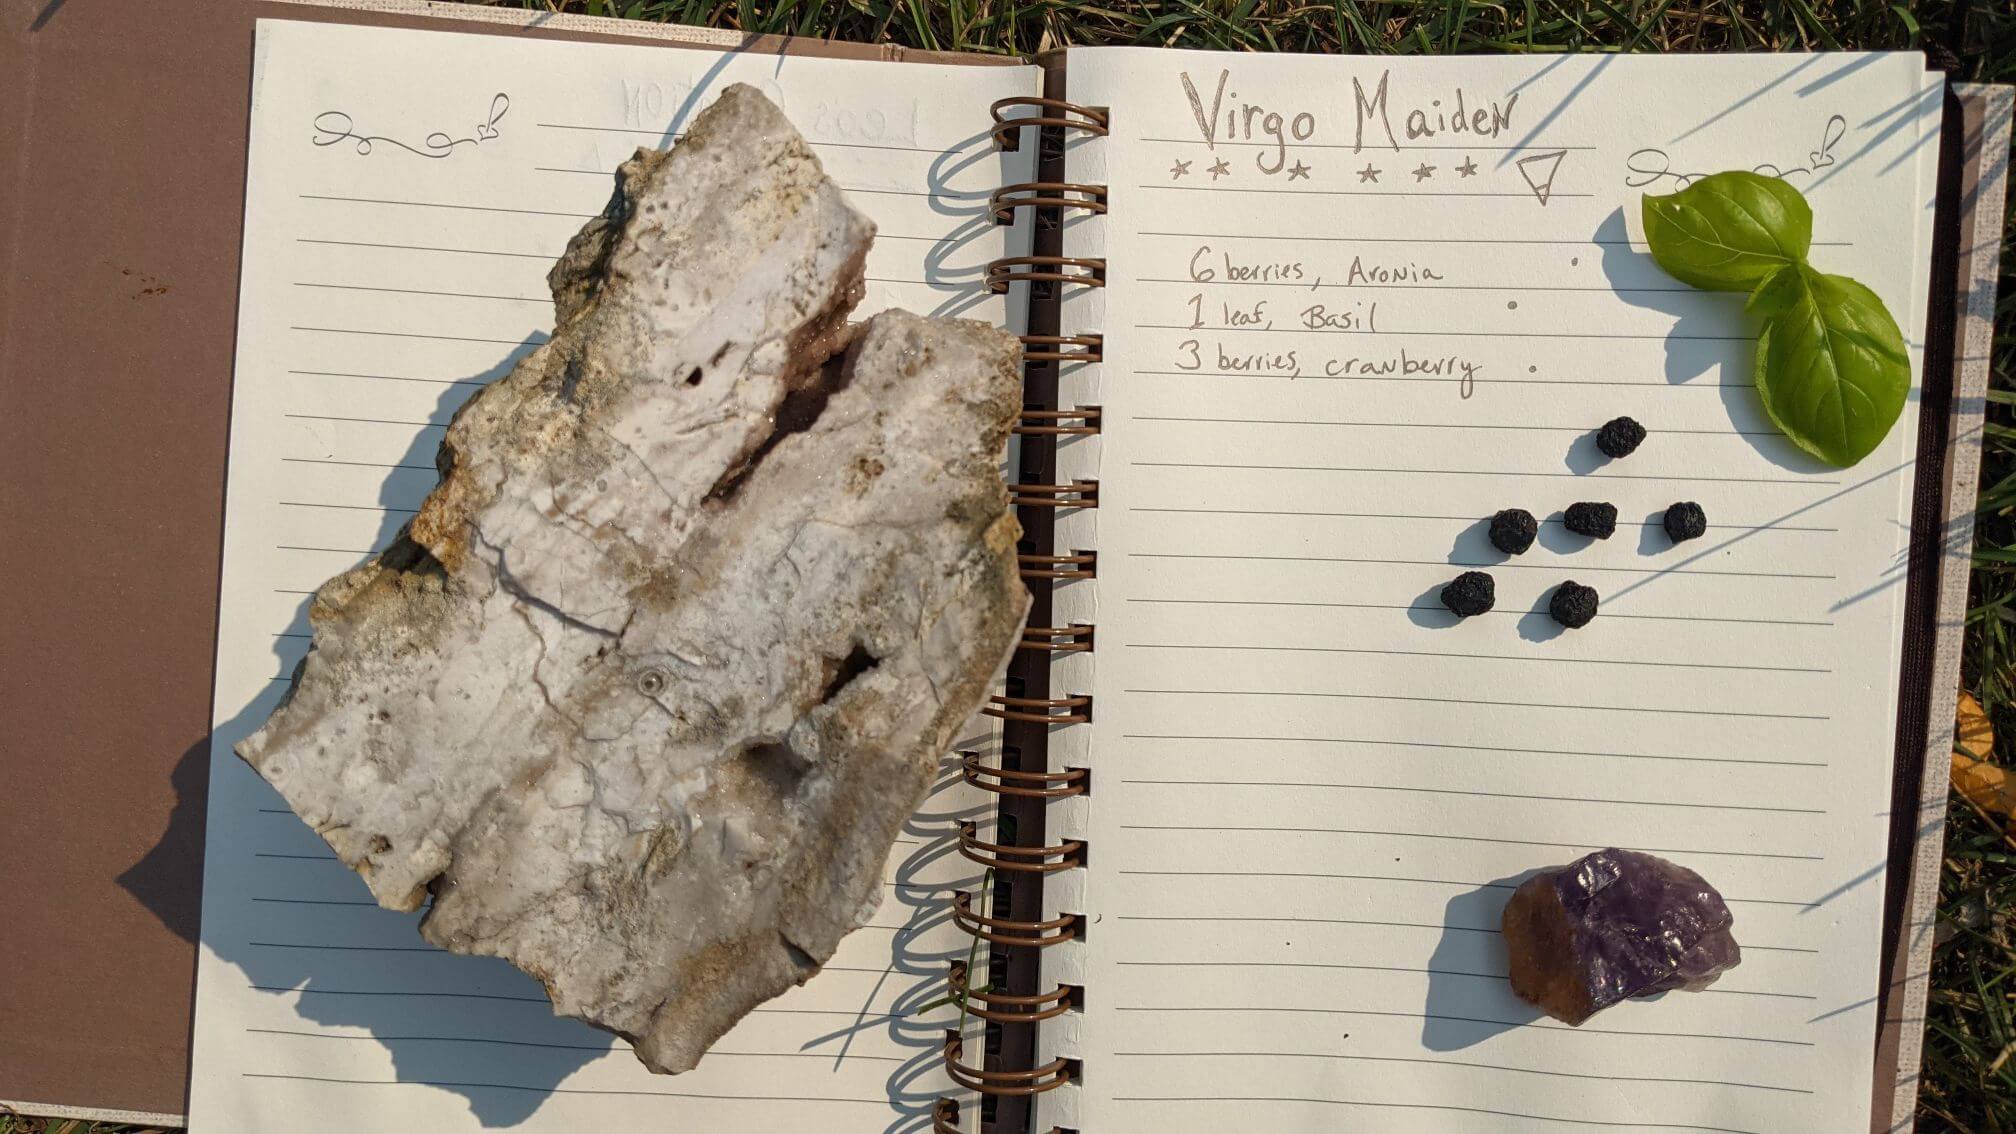 The handwritten recipe for The Virgo Maiden Kombucha is displayed in a notebook. A large natural stone sits nearby with a few fresh basil leaves and a scattering of dried Aronia berries.